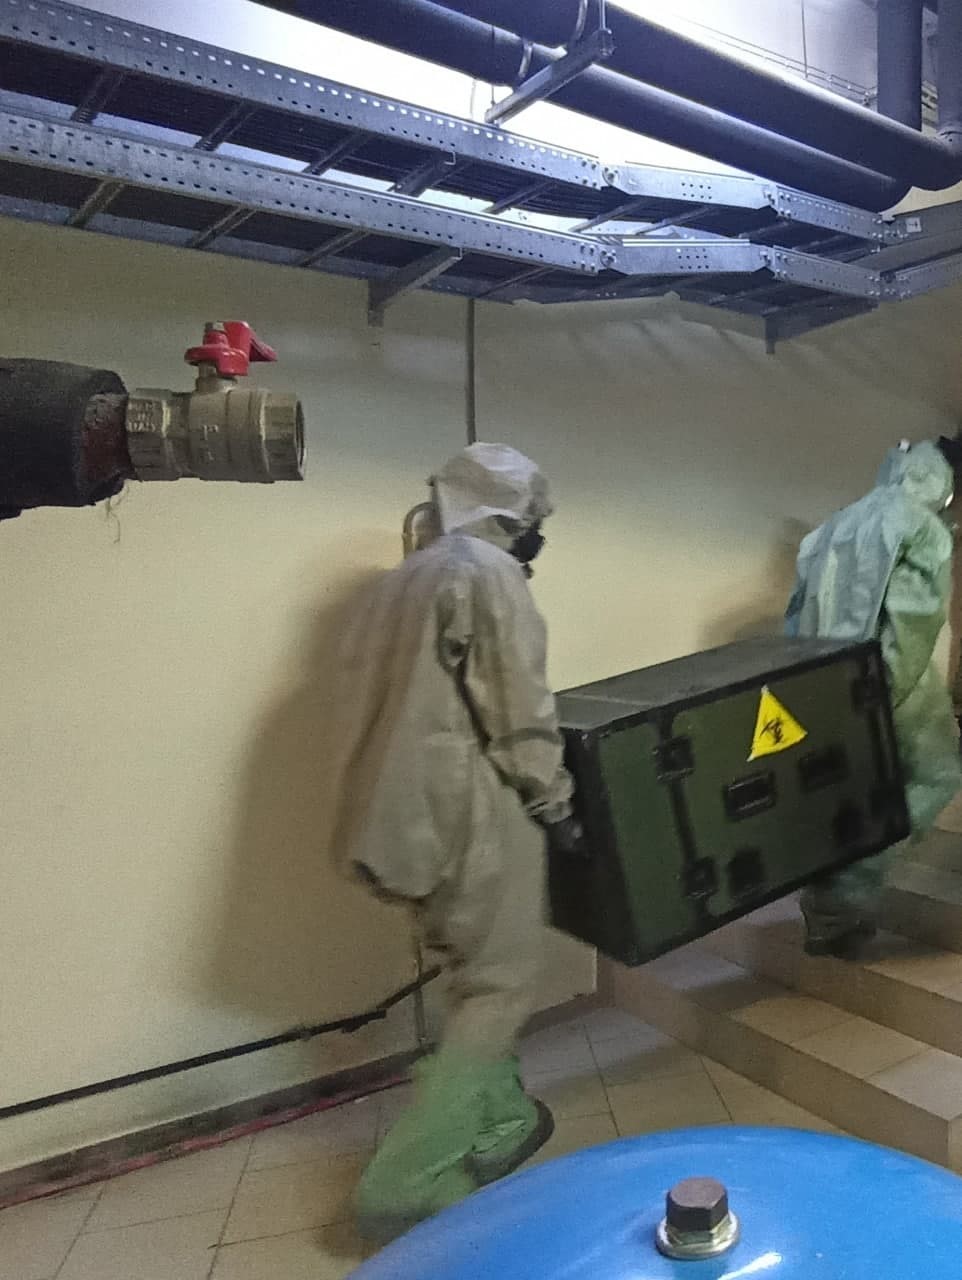 Two people in hazmat suits carrying a trunk with a biohazard symbol